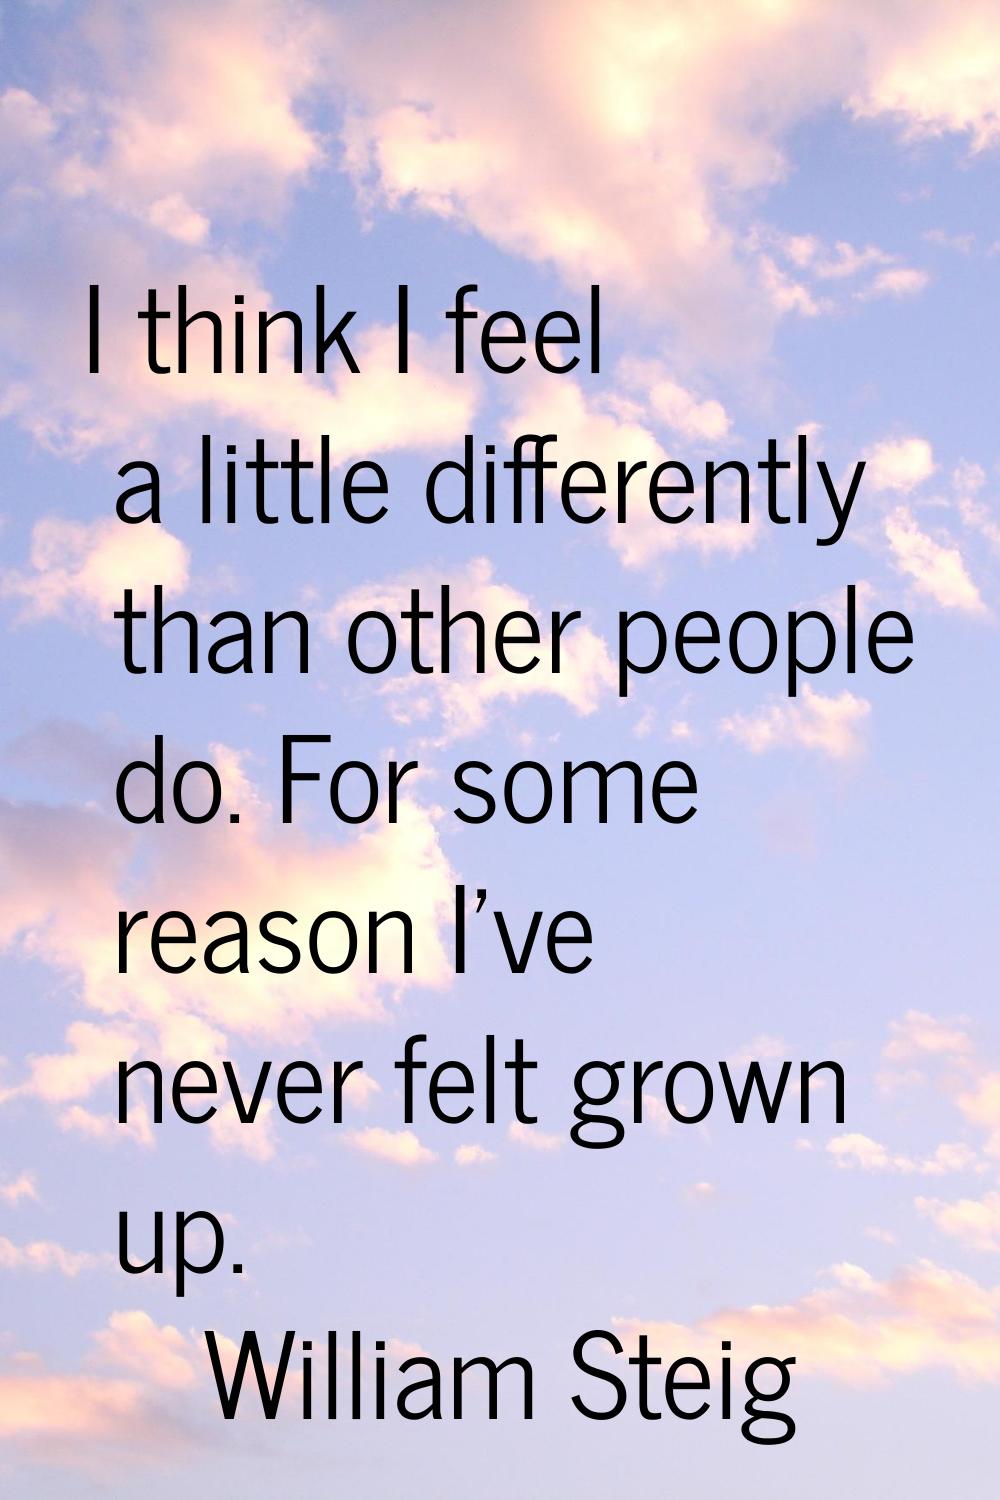 I think I feel a little differently than other people do. For some reason I've never felt grown up.